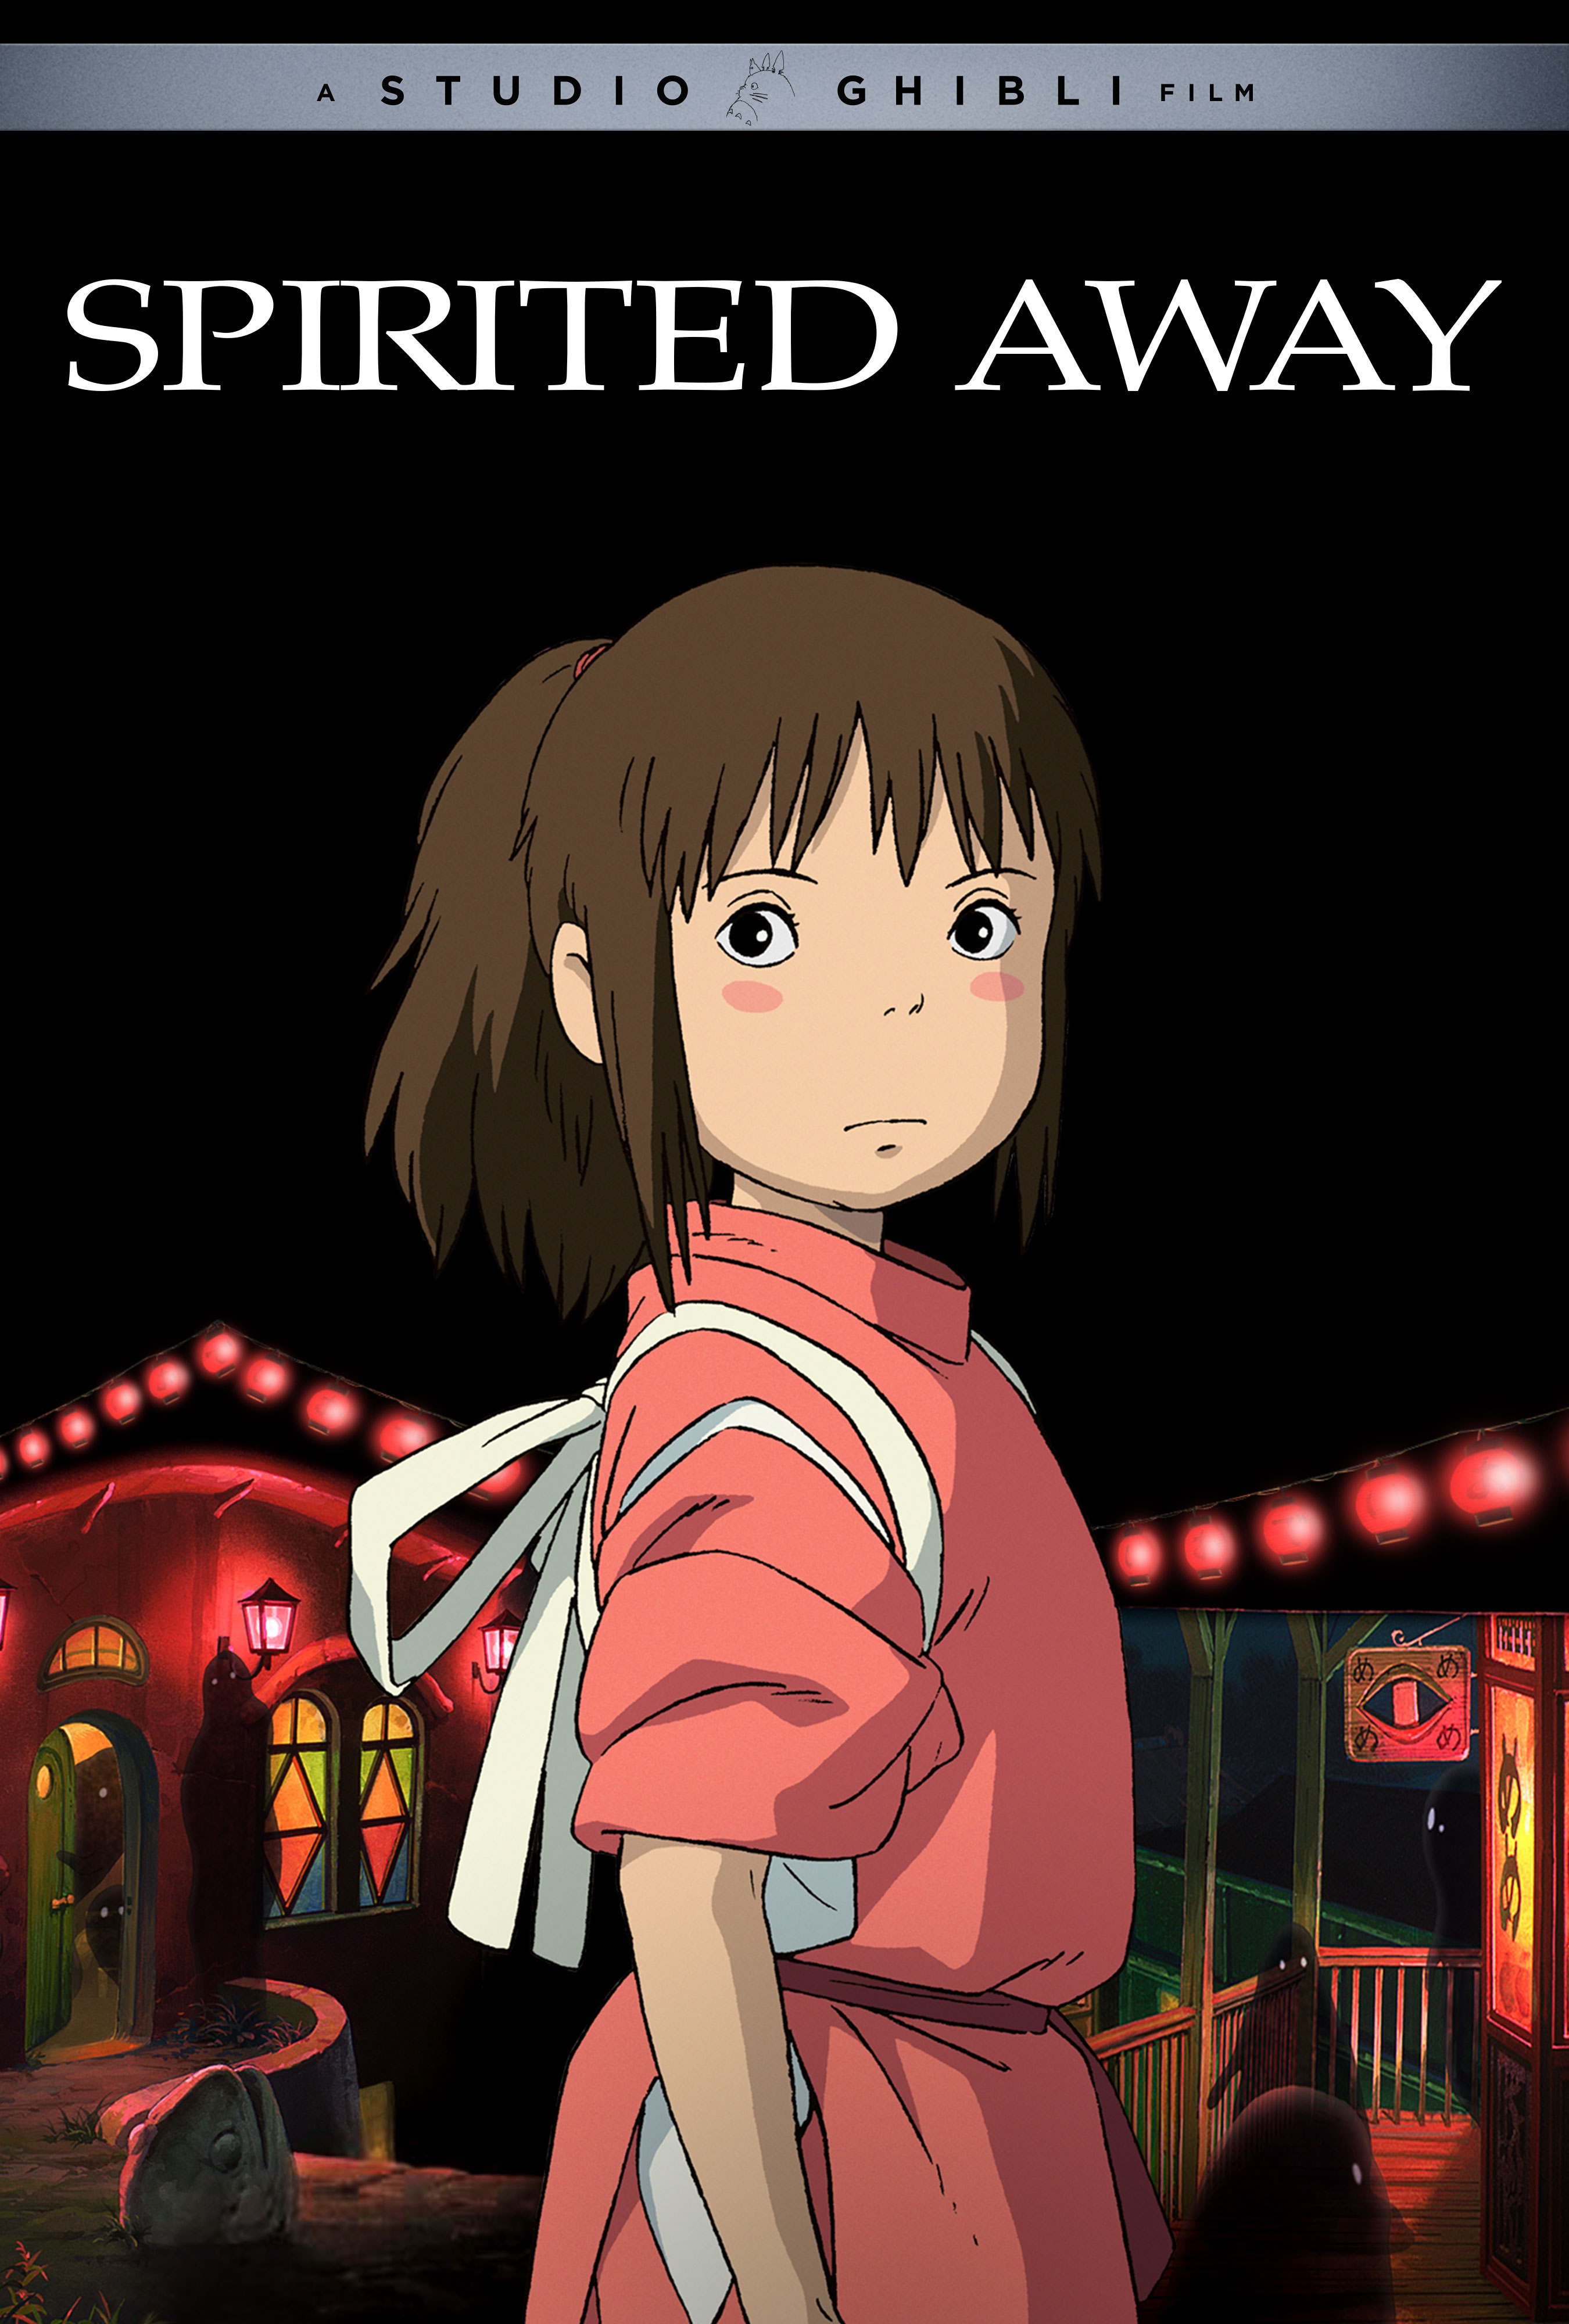 The theatrical poster for the GKIDS release of the 2001 theatrical anime film, Spirited Away, featuring the main character, a young girl known as Sen, dressed as a bath house attendant posing in front of a spooky spirit district.